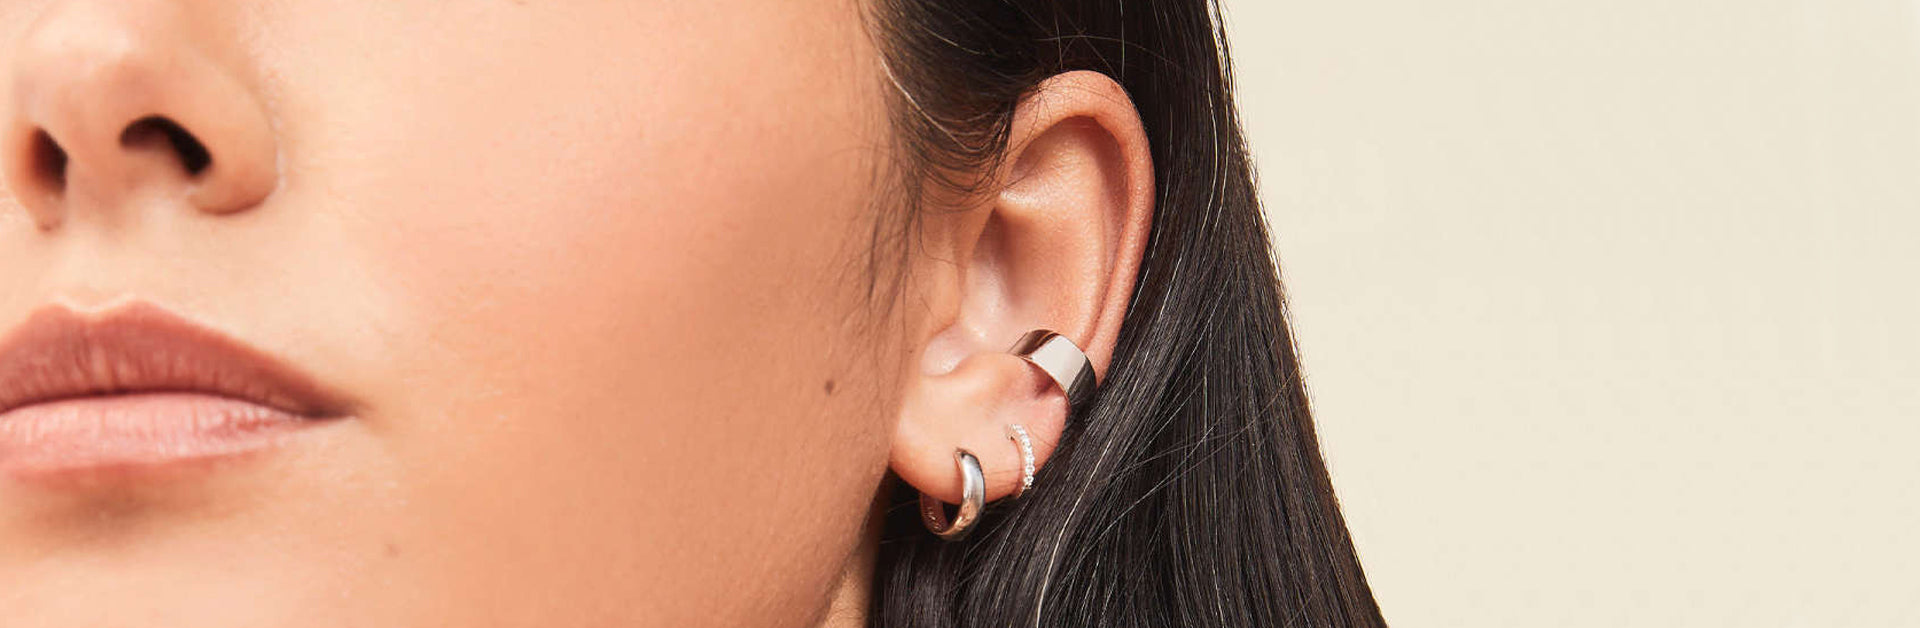 Benefits of Cuff Earrings and How to wear them